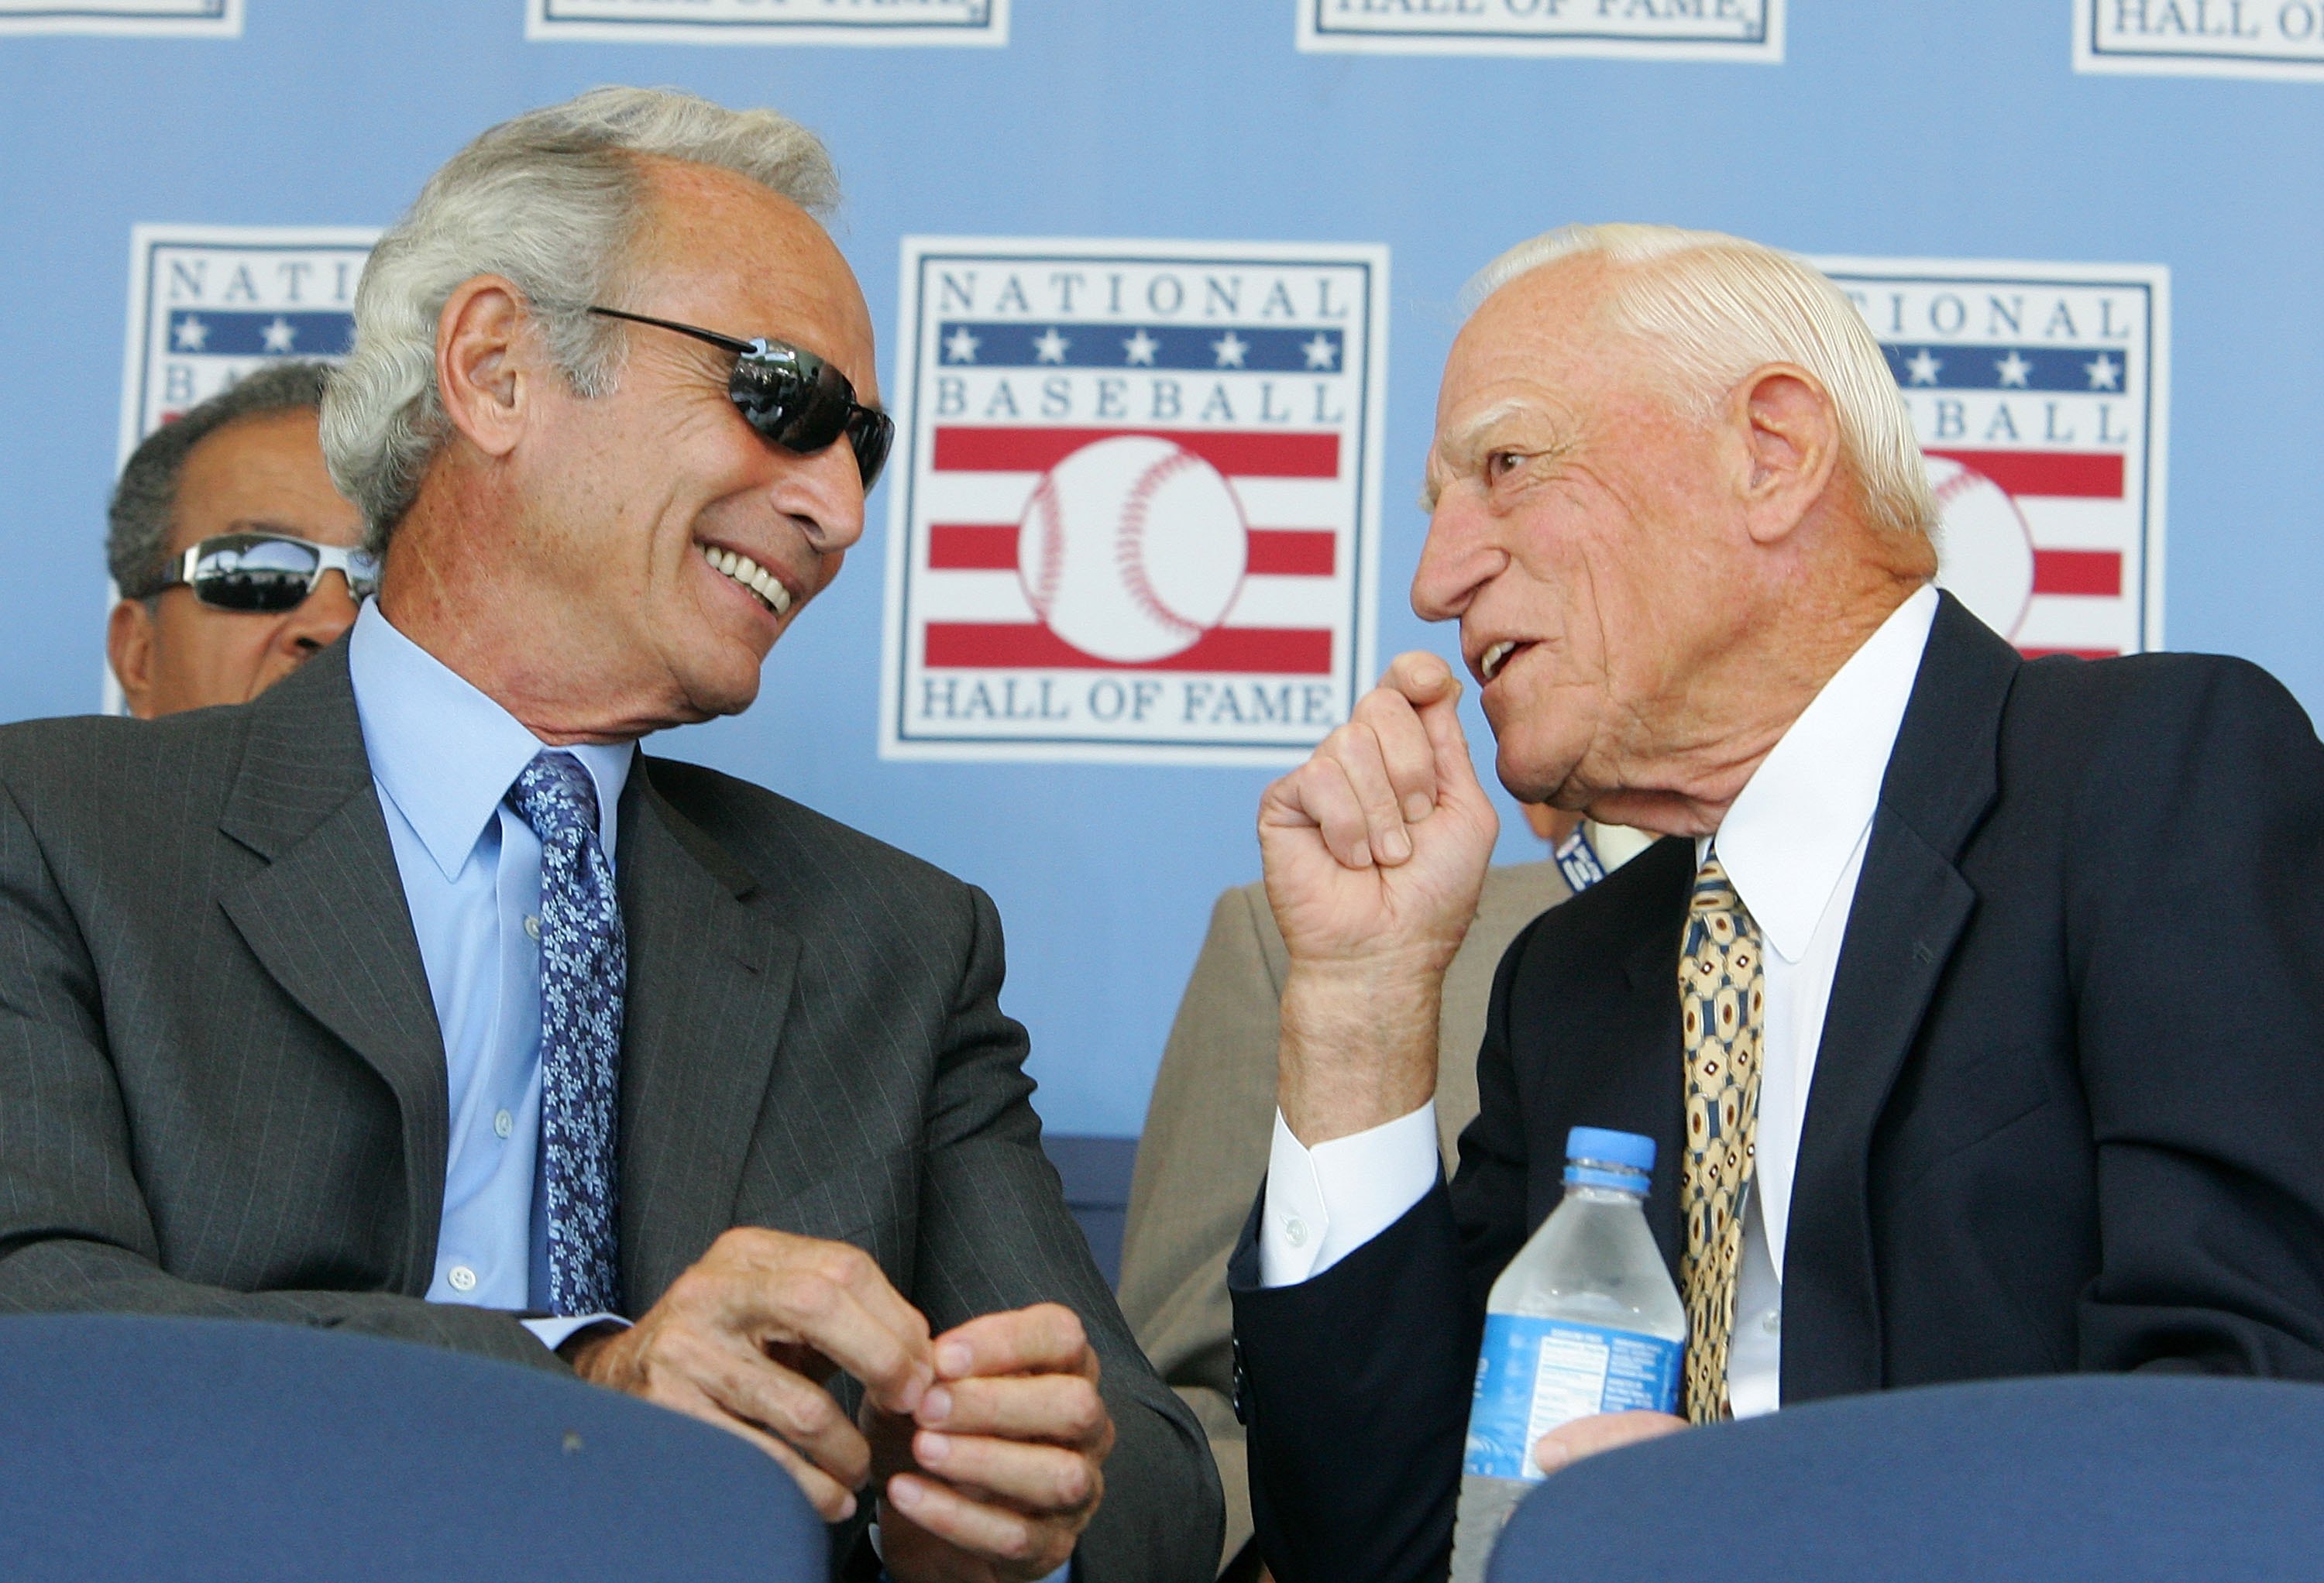 COOPERSTOWN, NY - JULY 30:  Hall of Famers Sandy Koufax (L) and Sparky Anderson talk before the start of the 2006 Baseball Hall of Fame induction ceremony at Clark Sports Center on July 30, 2006 in Cooperstown, New York.  (Photo by Jim McIsaac/Getty Image